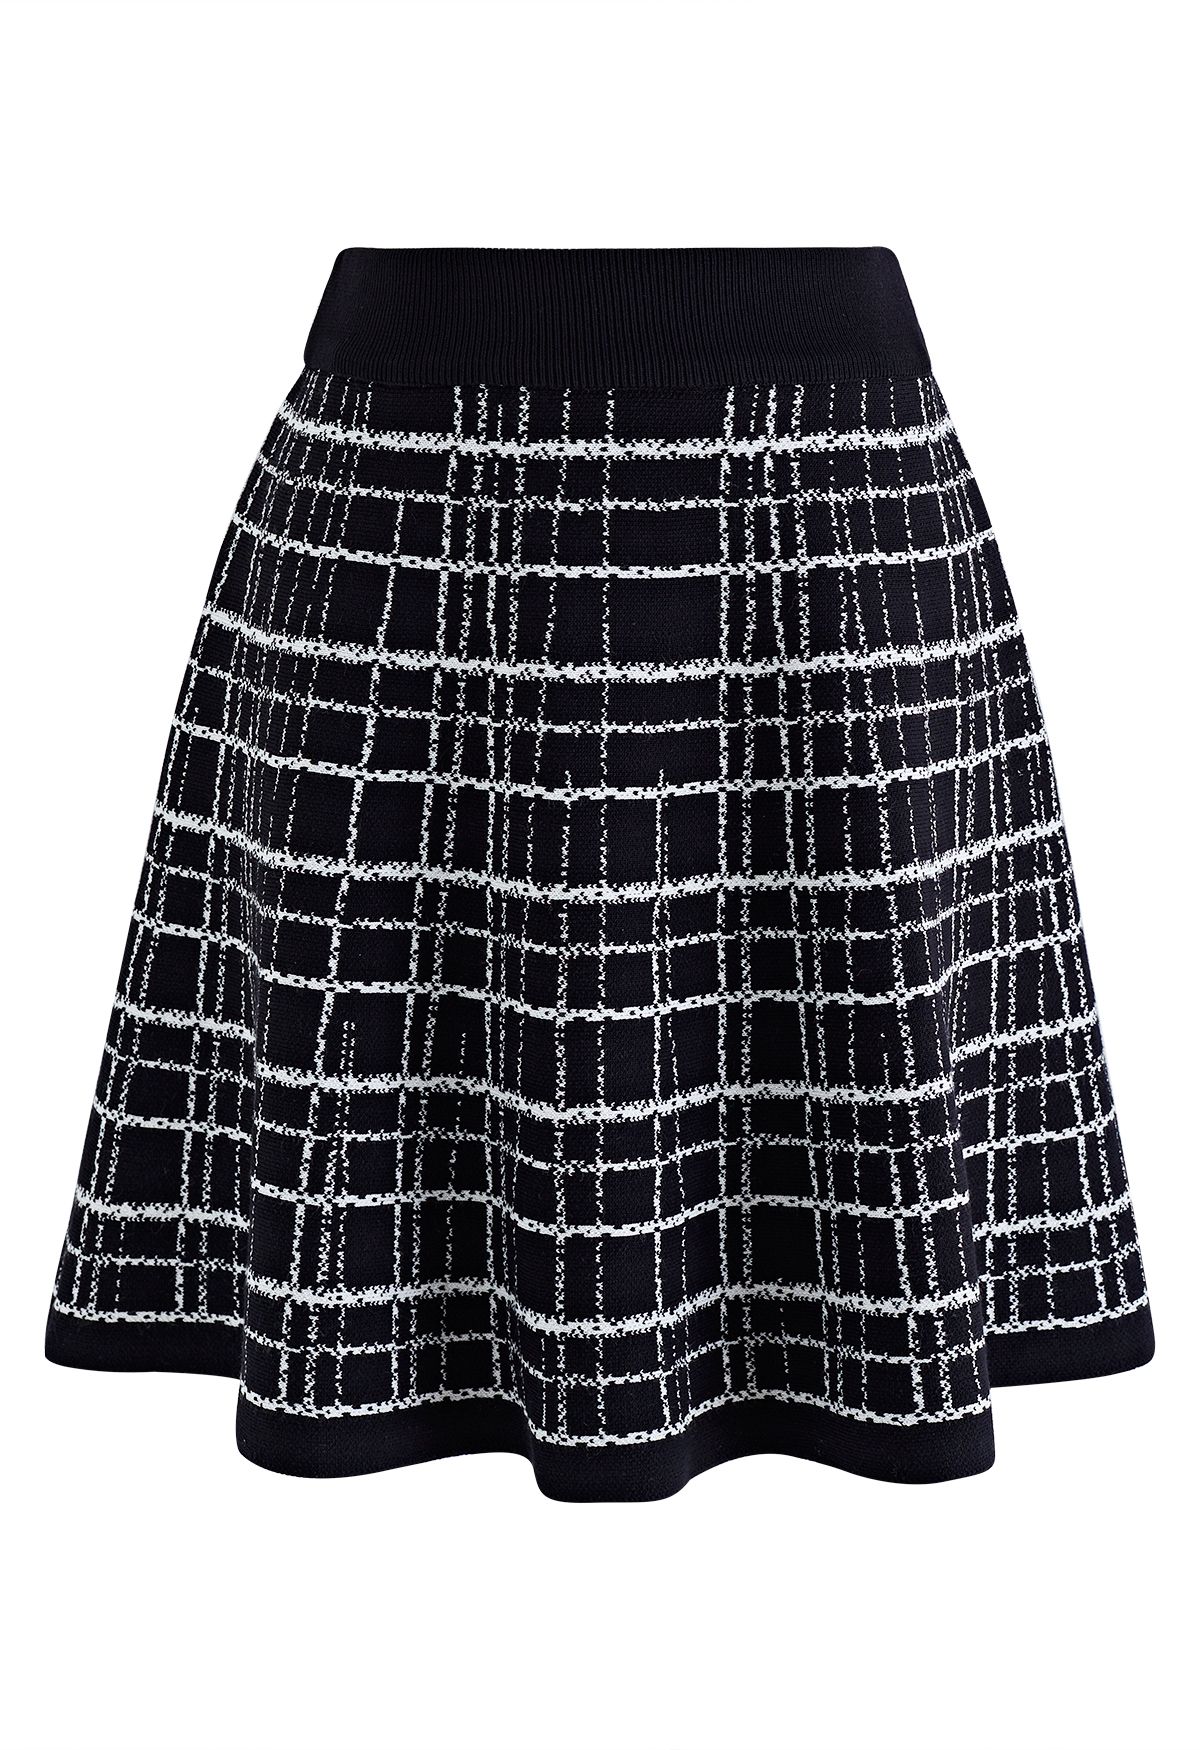 Grid Contrast Collar Knit Top and Skater Skirt Set